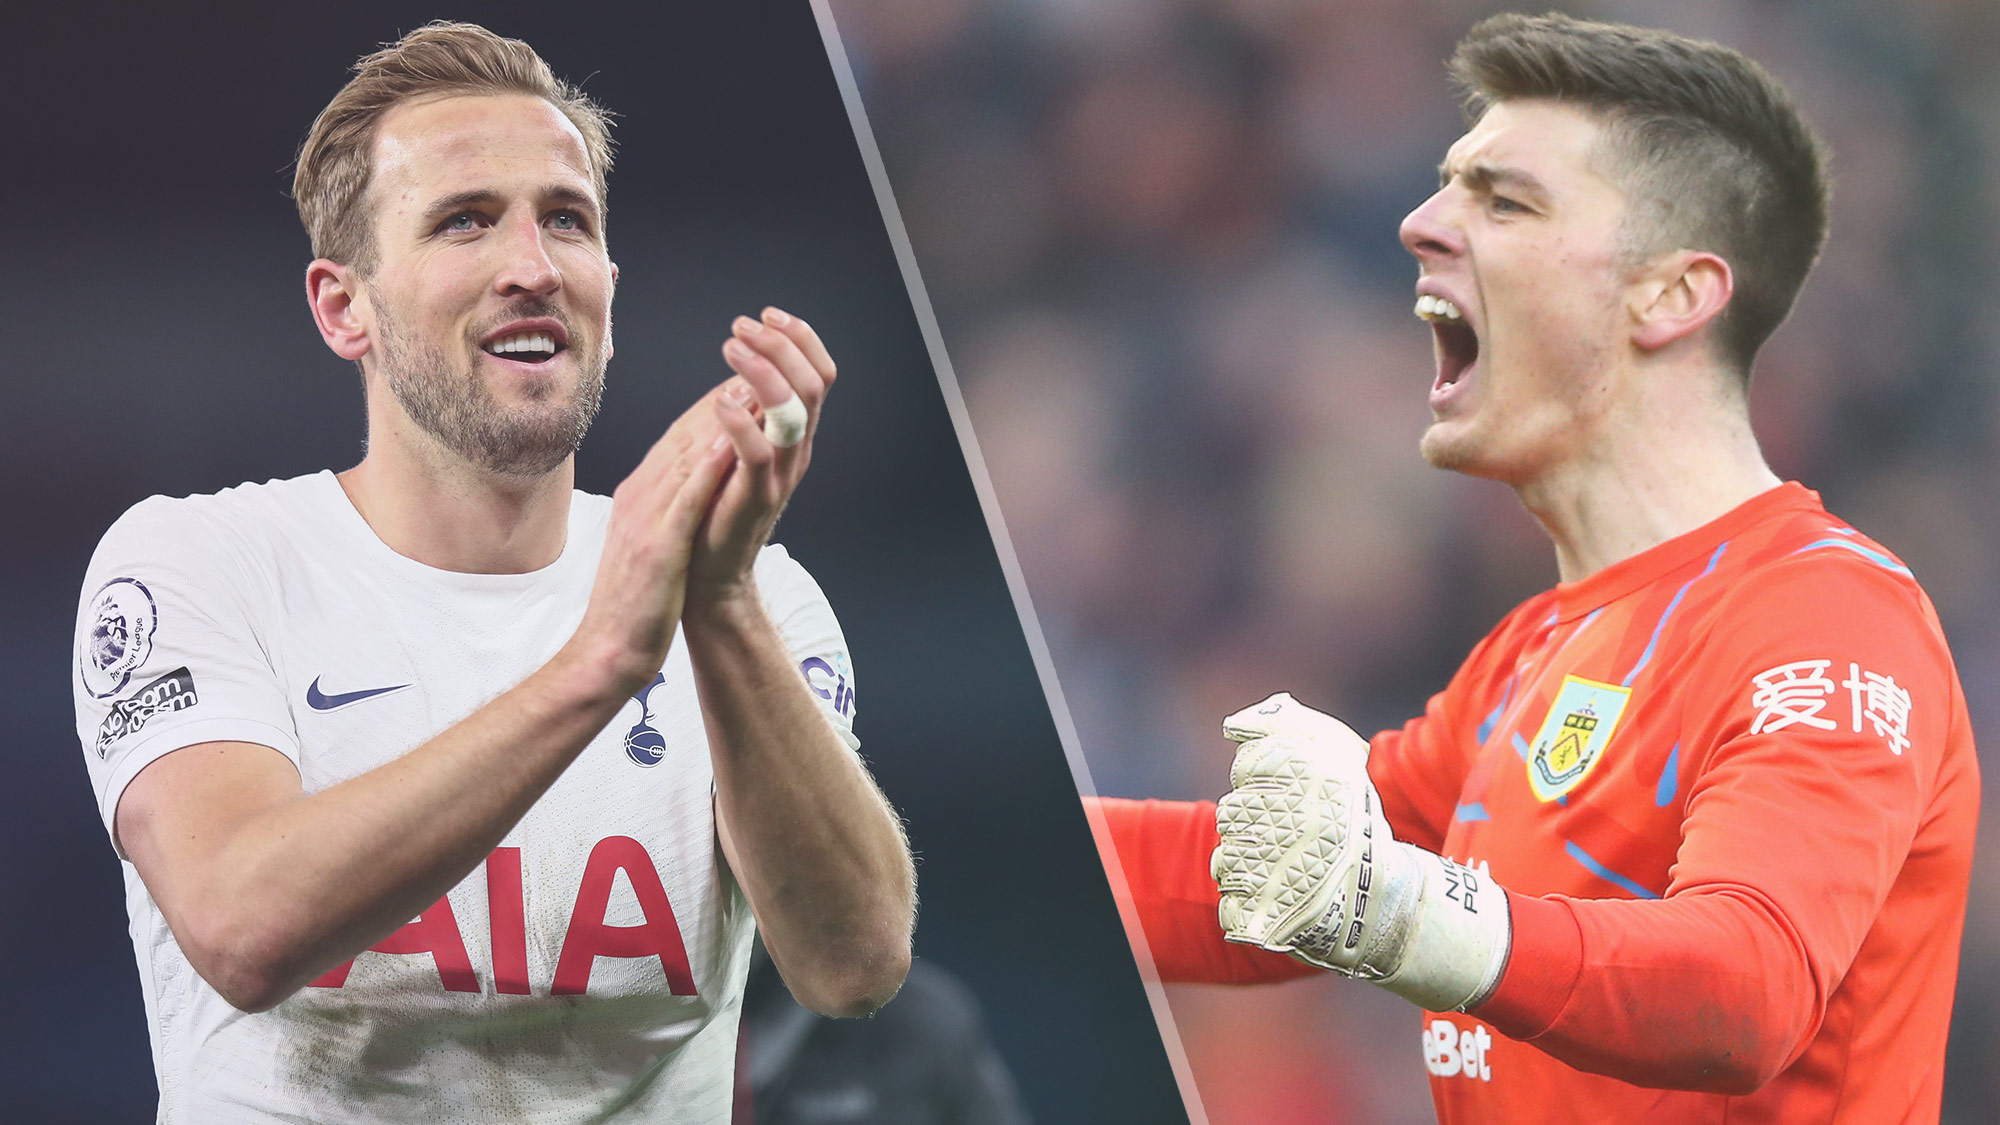 Harry Kane of Tottenham Hotspur and Nick Pope of Burnley could both feature in the Tottenham vs Burnley live stream